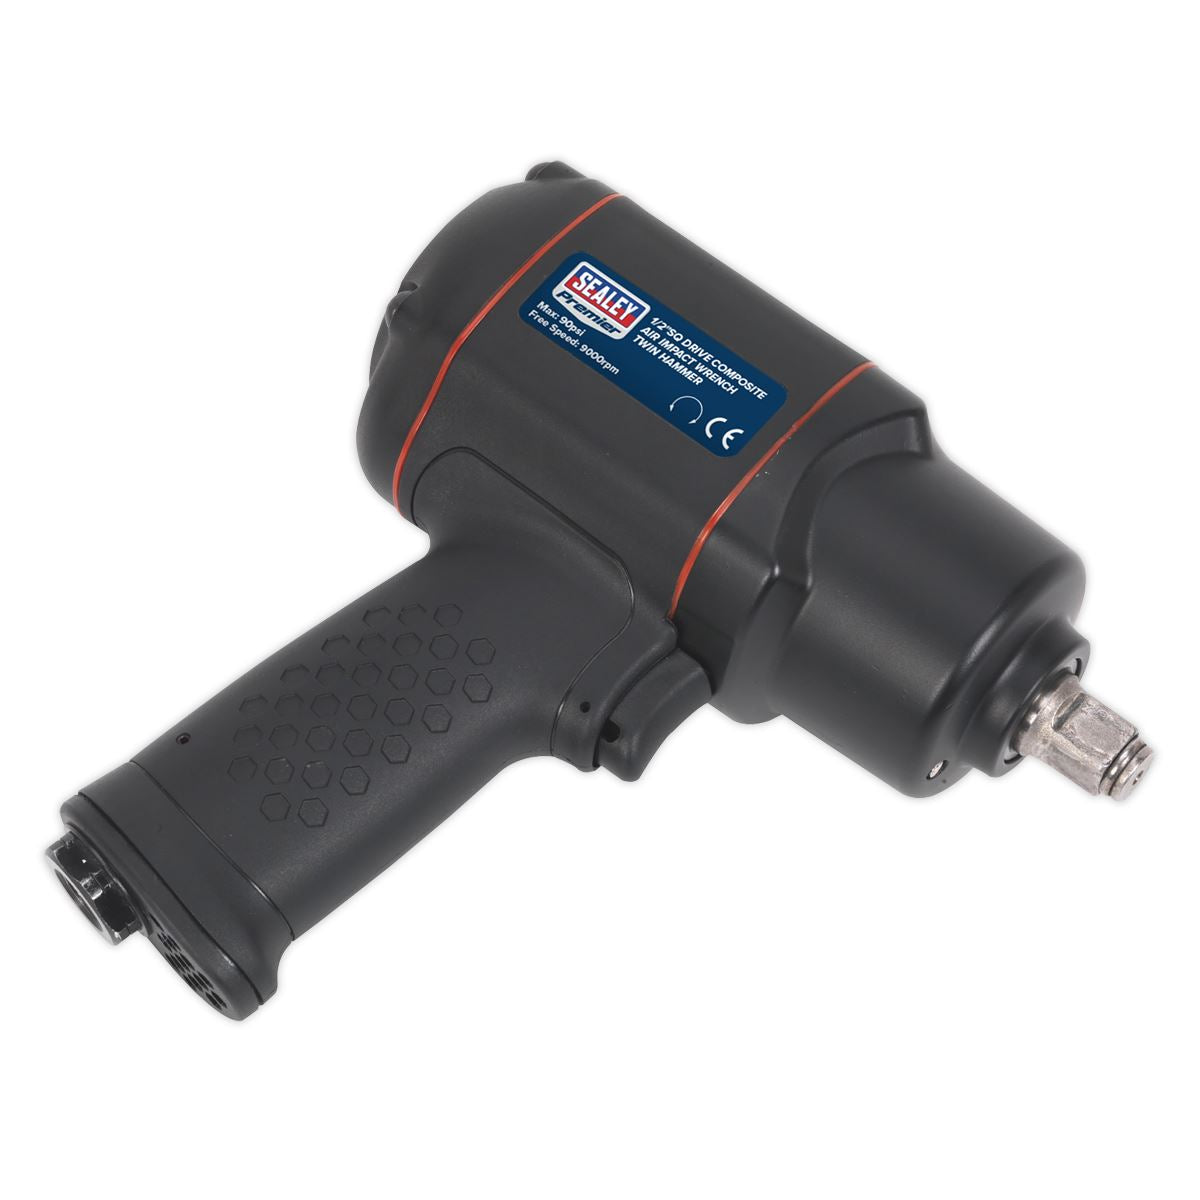 Sealey Premier Air Impact Wrench 1/2"Sq Drive - Twin Hammer